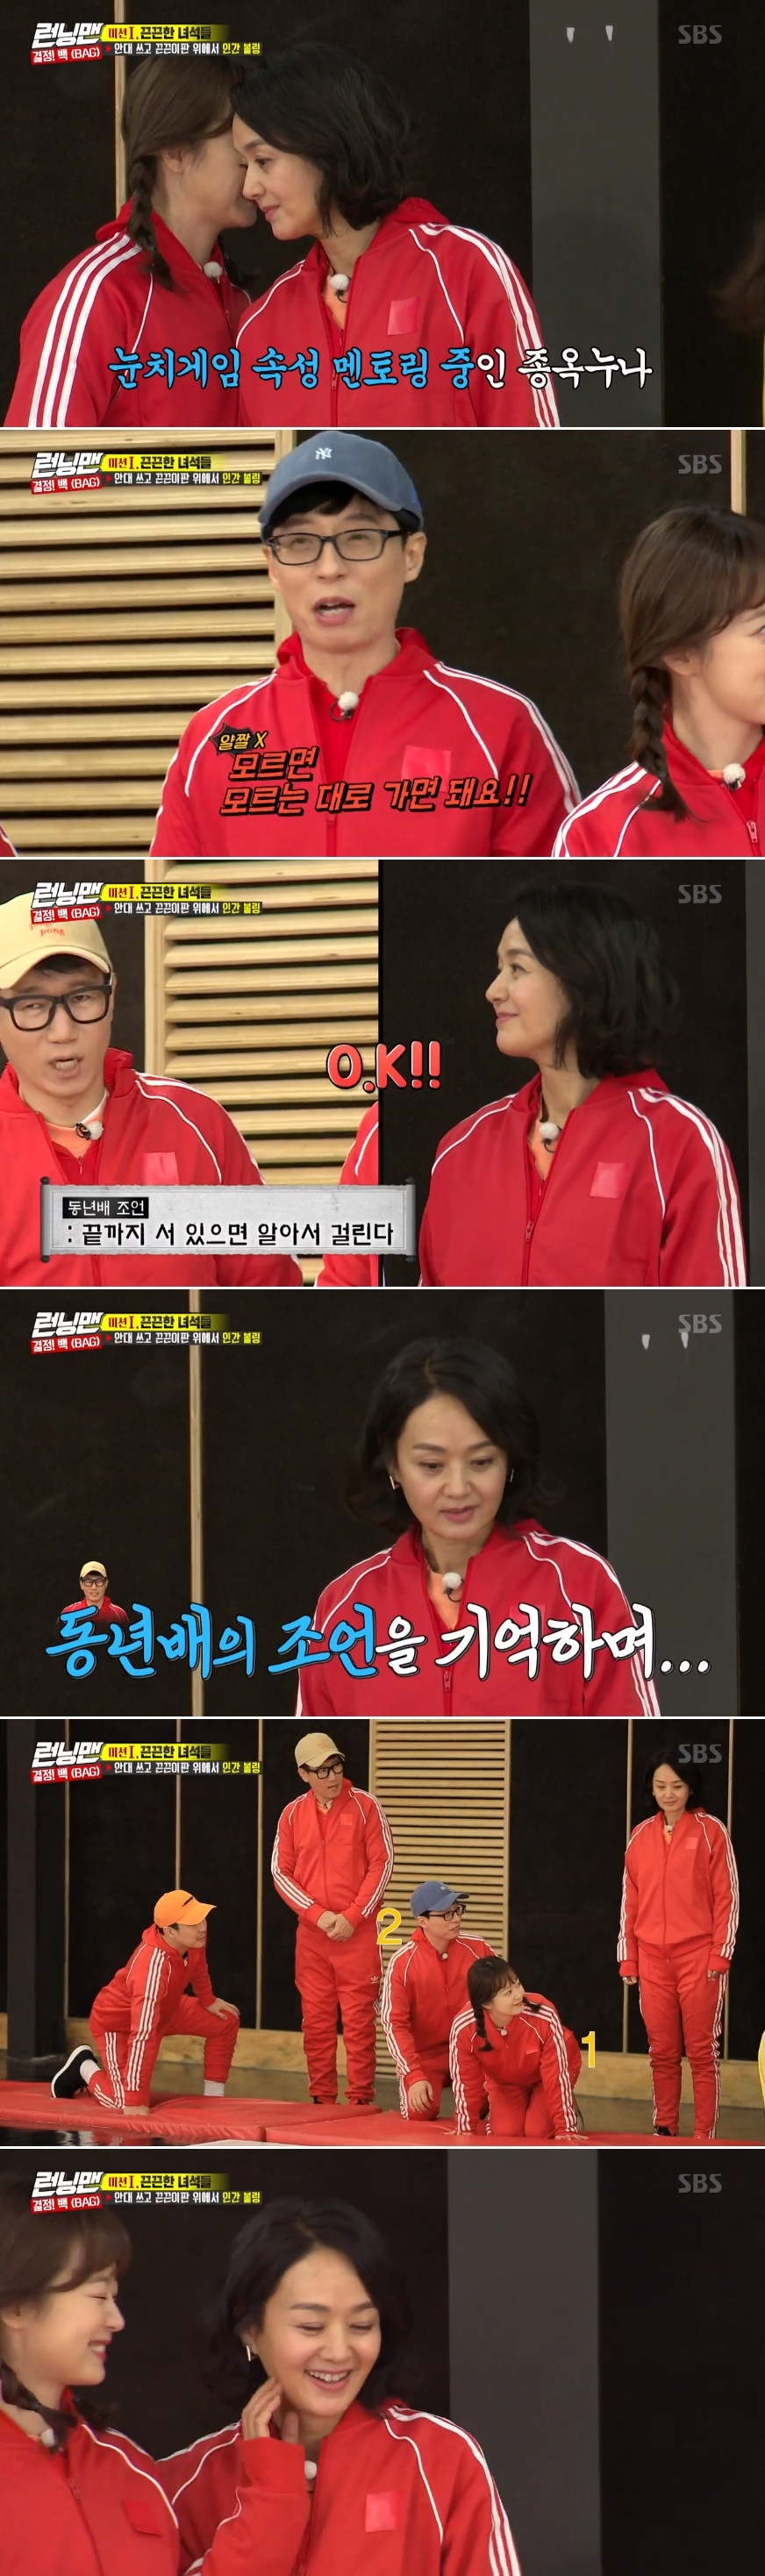 Seoul=) = Bae Jong-ok appeared on Running Man and played a game of the game, while Ji Suk-jin was dropped and laughed.On SBS Running Man broadcasted on the afternoon of the afternoon, Bae Jong-ok and Shin Hye-sun appeared as guests and were shown to play a game.On this day, the Red Team (Bae Jong-ok Yoo Jae-suk Ji Suk-jin Haha Jeon So-min) and the Yellow Team (Shin Hye-sun Kim Jong-guk Song Ji-hyo Yang Se-chan Lee Kwang-soo) had to roll forward with their eye bandages and knock down the bowling pins. People mission started to make a game of sight.Bae Jong-ok was puzzled by not knowing exactly the Game Rule and Ji Suk-jin explained: You just need to stay calm.Bae Jong-ok stood still while the other members shouted the number without knowing the English, and eventually laughed.In the subsequent mission, the red teams Ji Suk-jin became the first runner, and the smile was made when the socks and gloves were peeled off while sticking to the sticks without reaching the bowling pin.